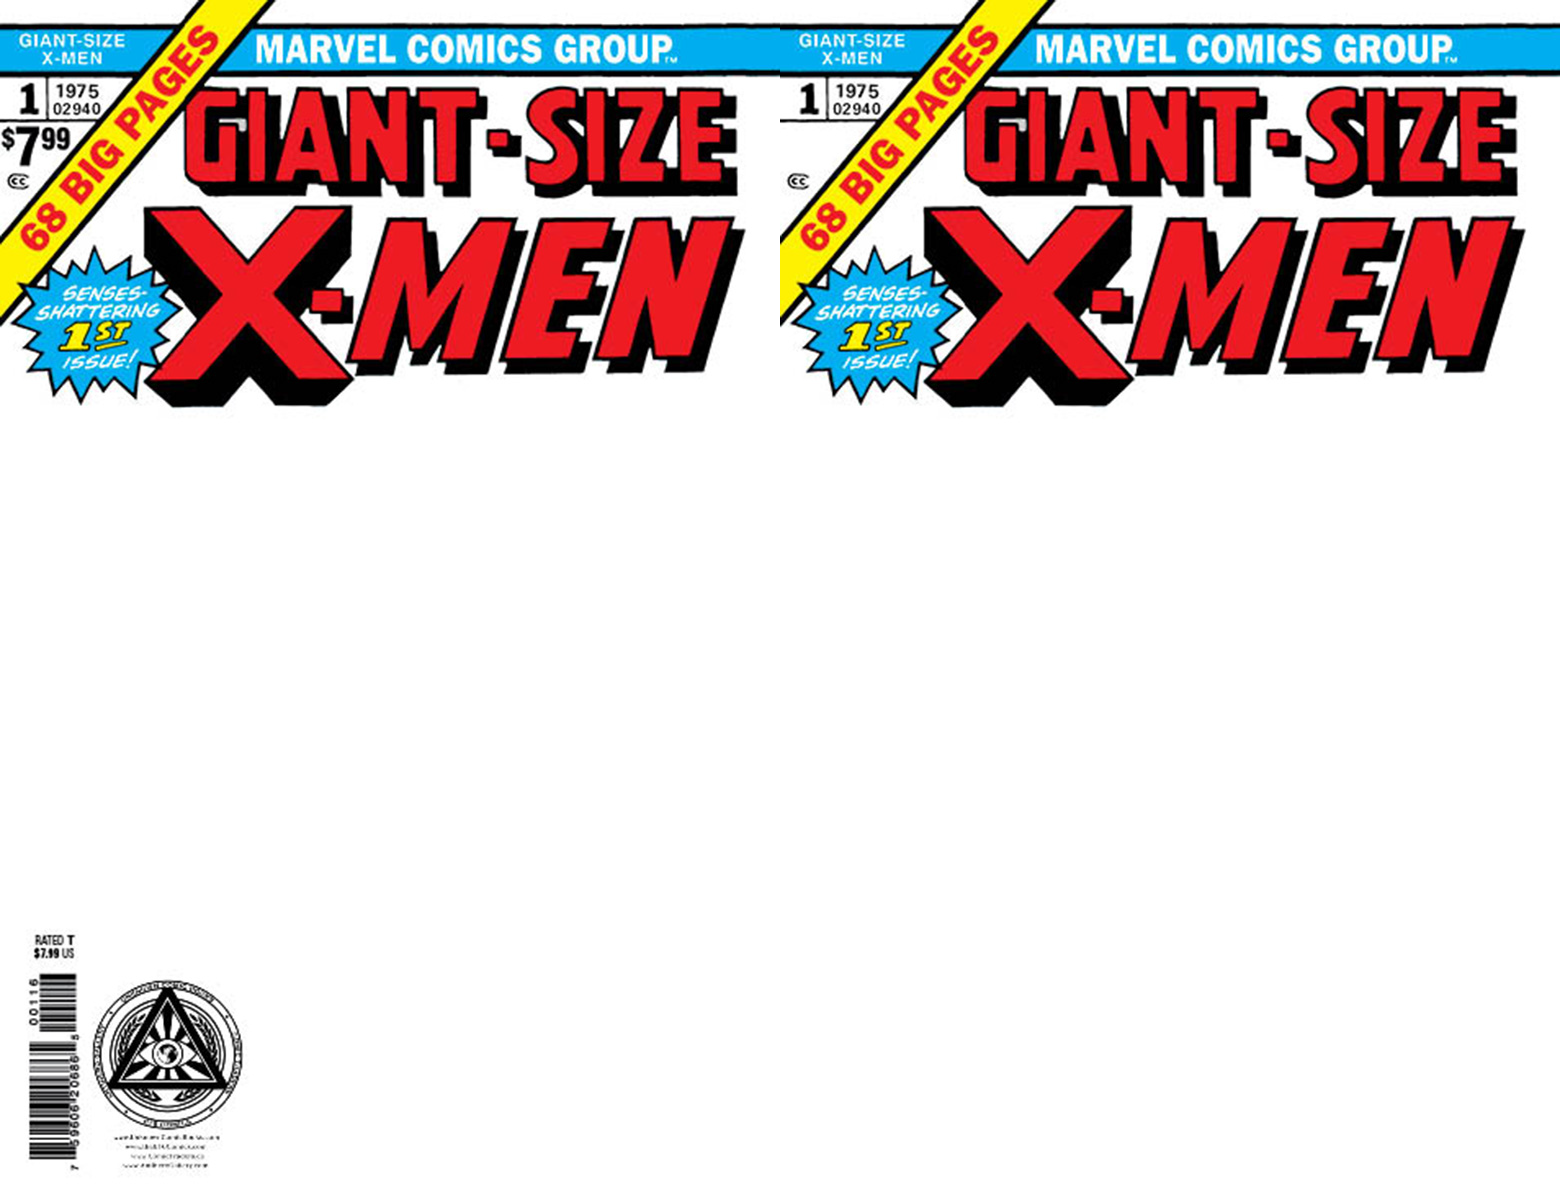 [10 PACK] GIANT-SIZE X-MEN #1 FACSIMILE EDITION [NEW PRINTING] UNKNOWN COMICS EXCLUSIVE BLANK VAR (08/16/2023)